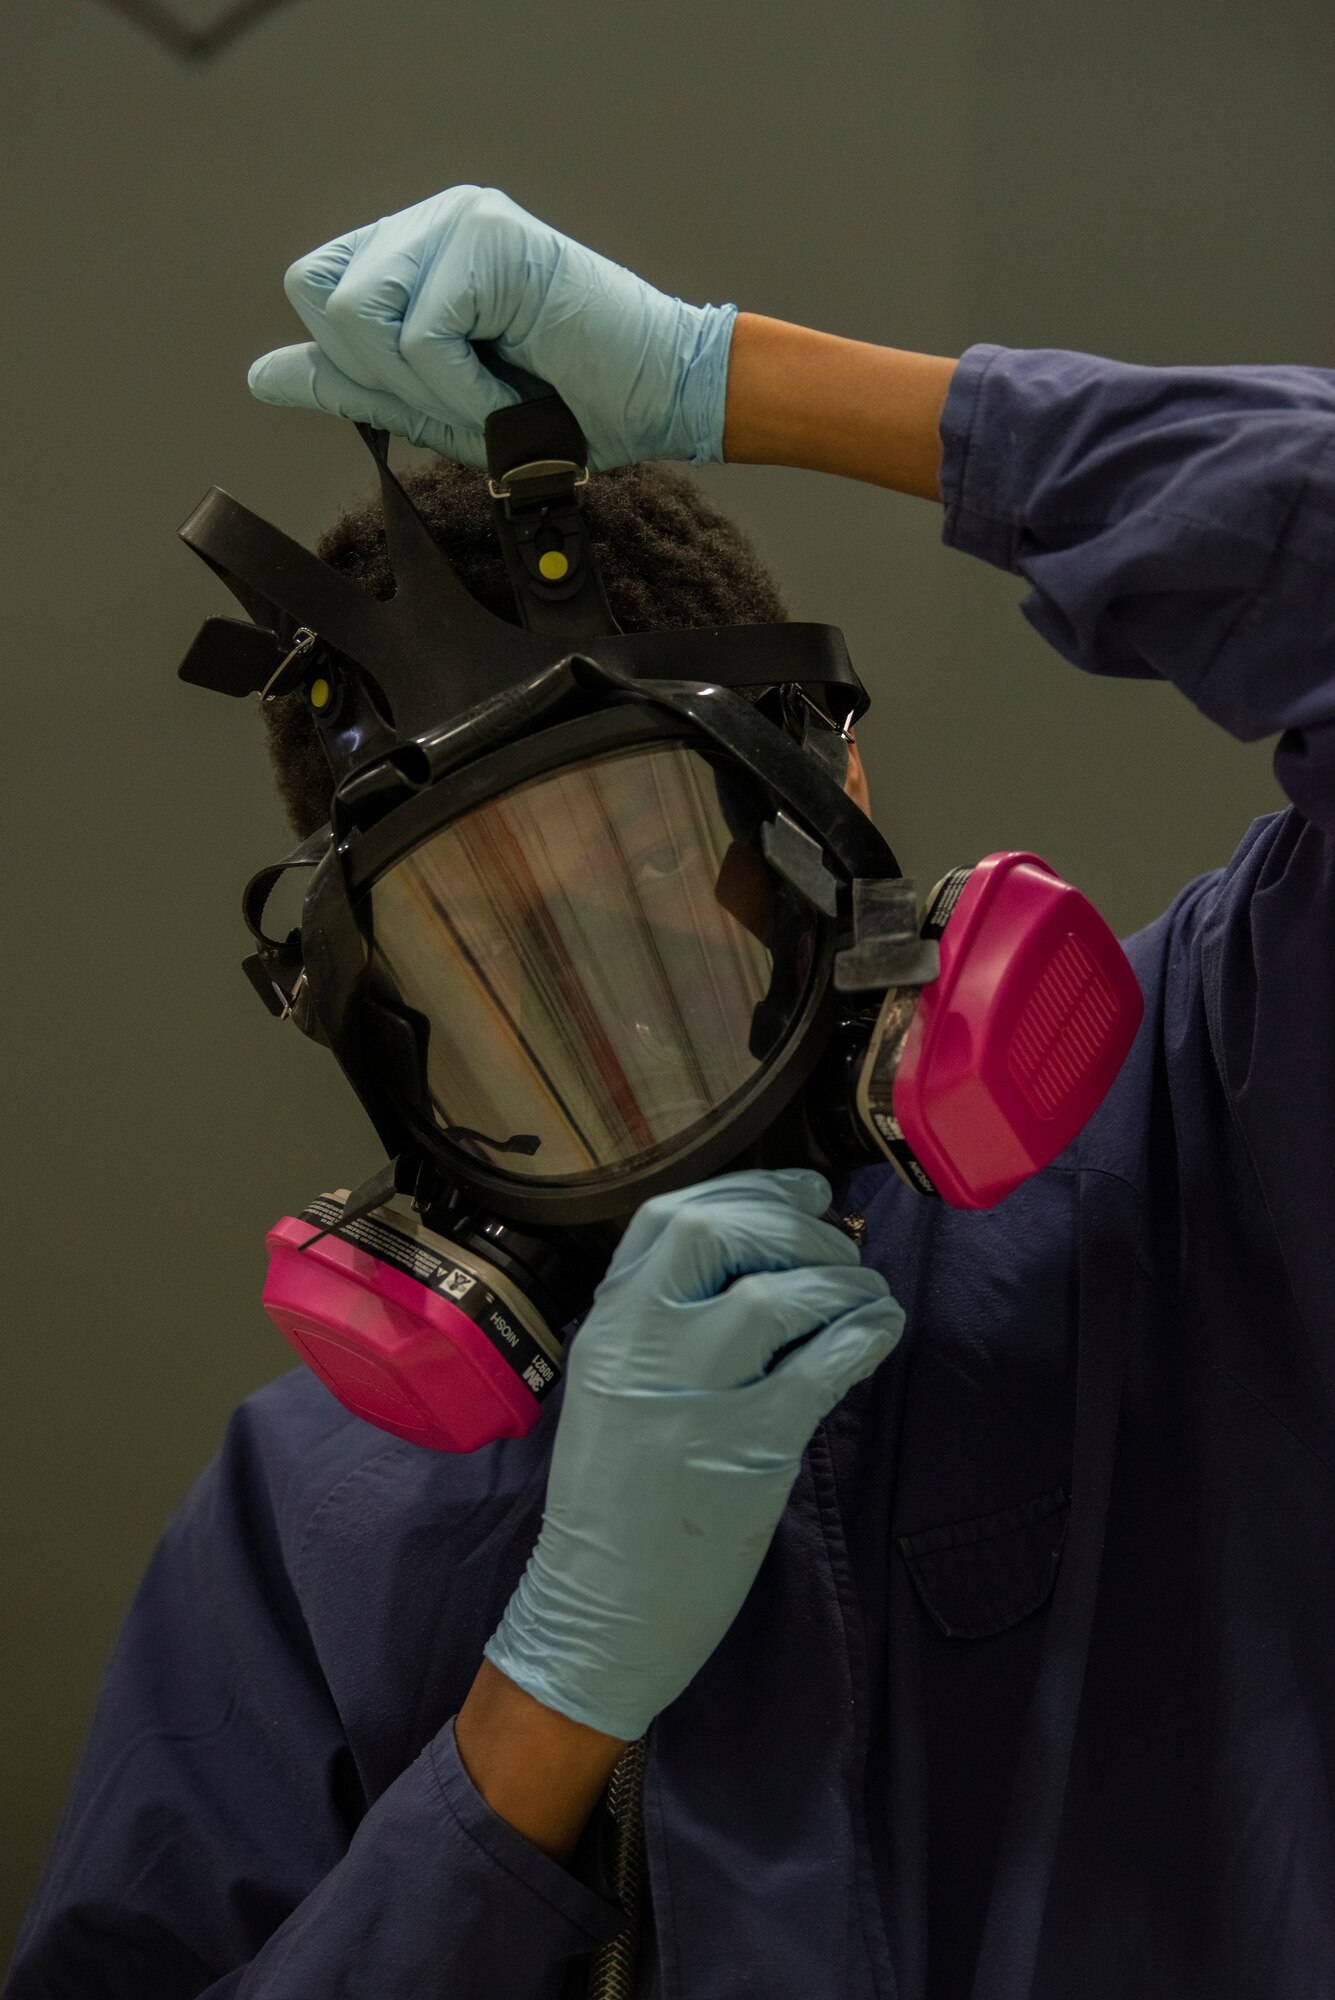 Airman 1st Class Dezmond Ross, 100th Maintenance Squadron fuel systems repair apprentice, puts on an oxygen respirator at RAF Mildenhall, England, May 27, 2020. Fuel systems Airmen wear the respirator to protect themselves from the vapor while cleaning inside the fuel cells of aircraft. (U.S. Air Force photo by Airman 1st Class Joseph Barron)